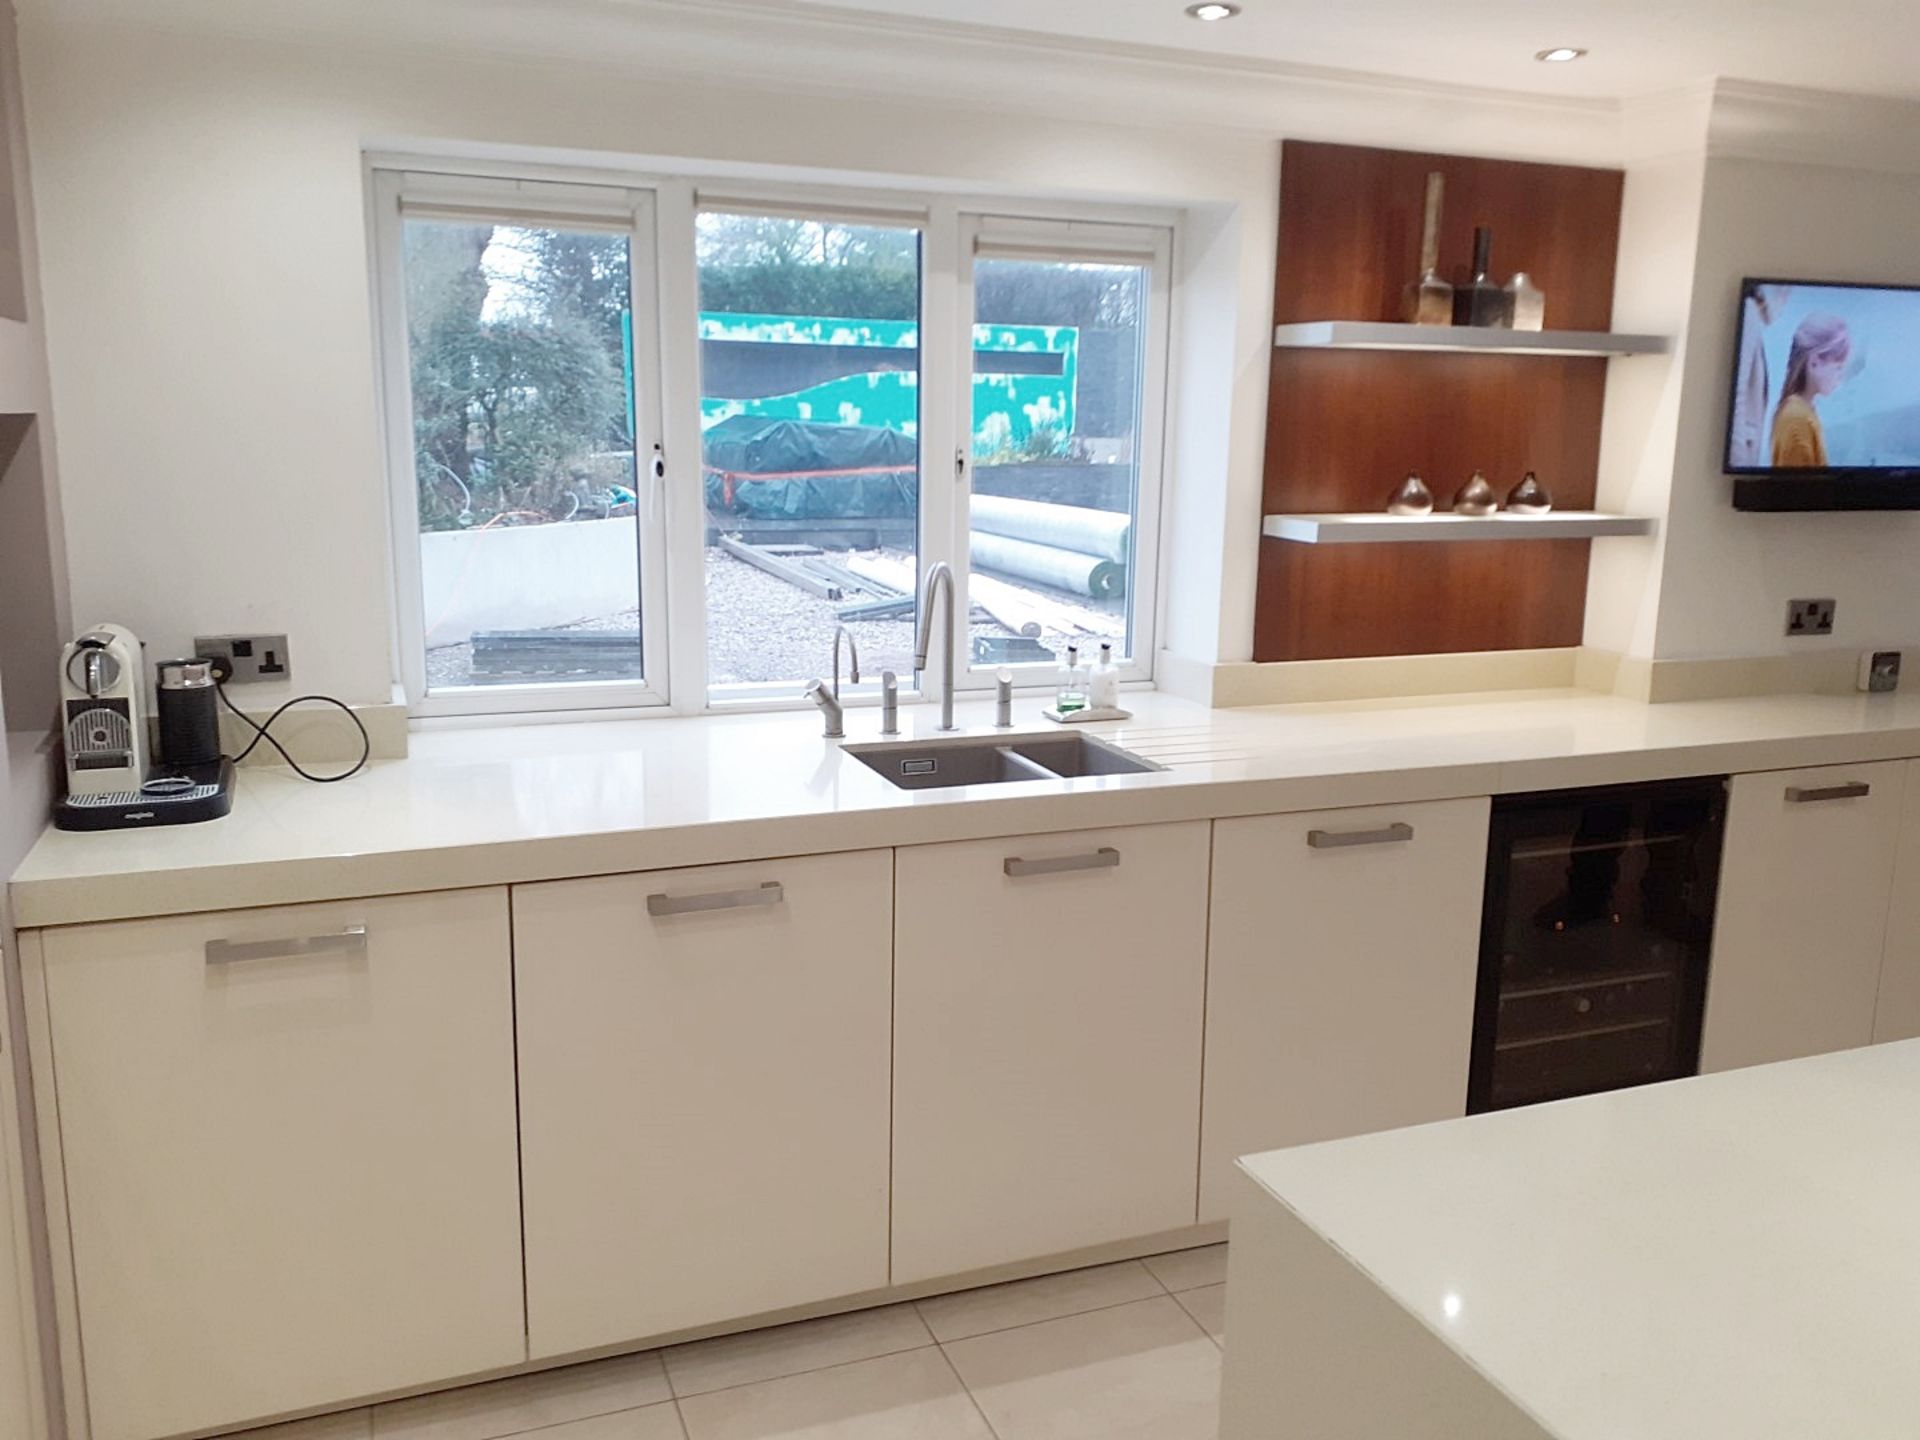 1 x ALNO Fitted Kitchen With Integrated Miele Appliances, Silestone Worktops & Breakfast Island - Image 24 of 77